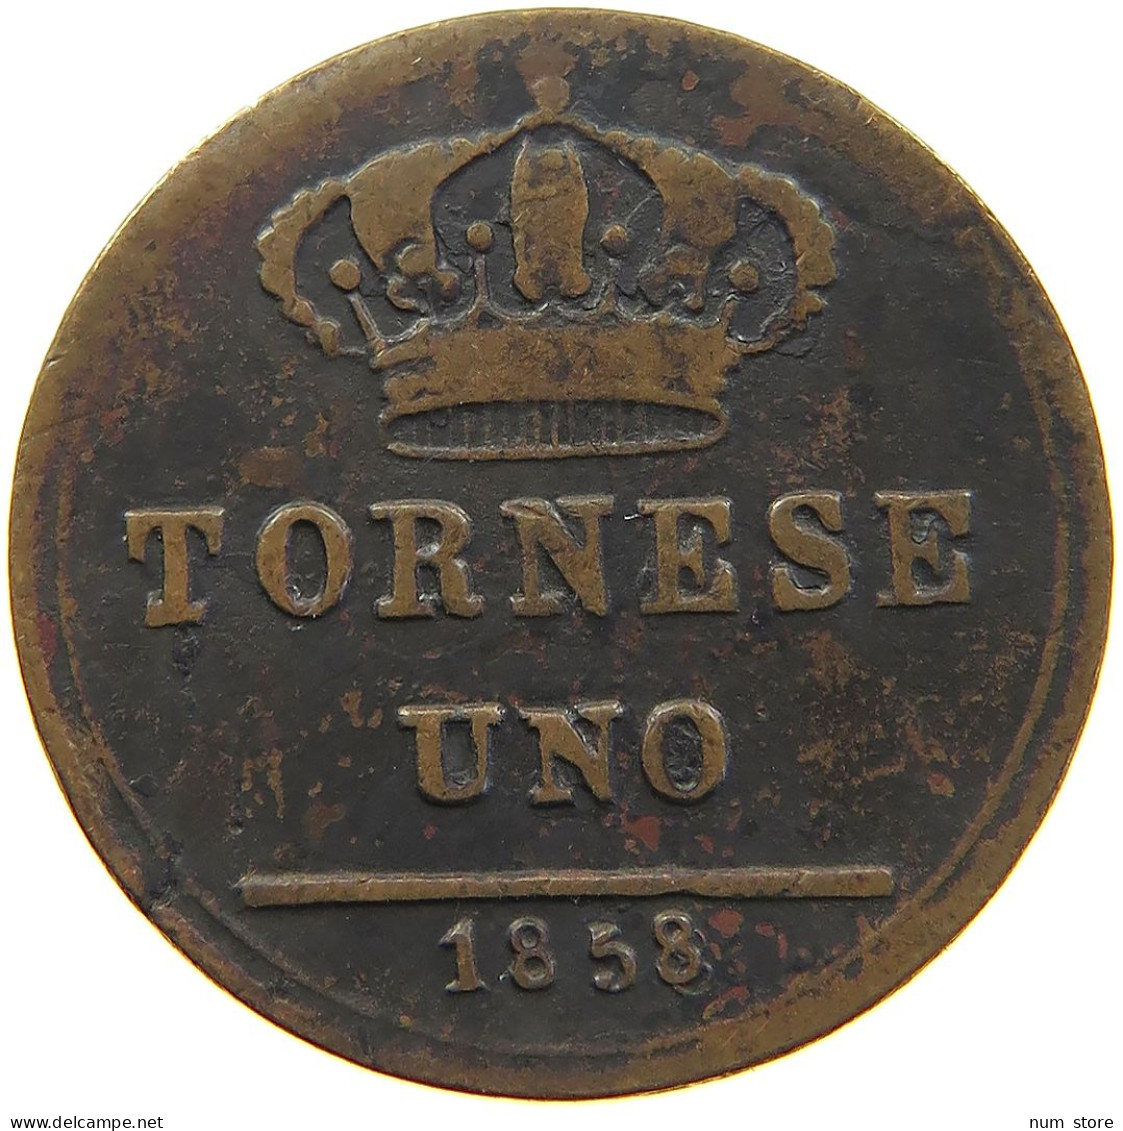 ITALY STATES TORNESE 1858 TWO SICILIES #s081 0587 - Due Sicilie